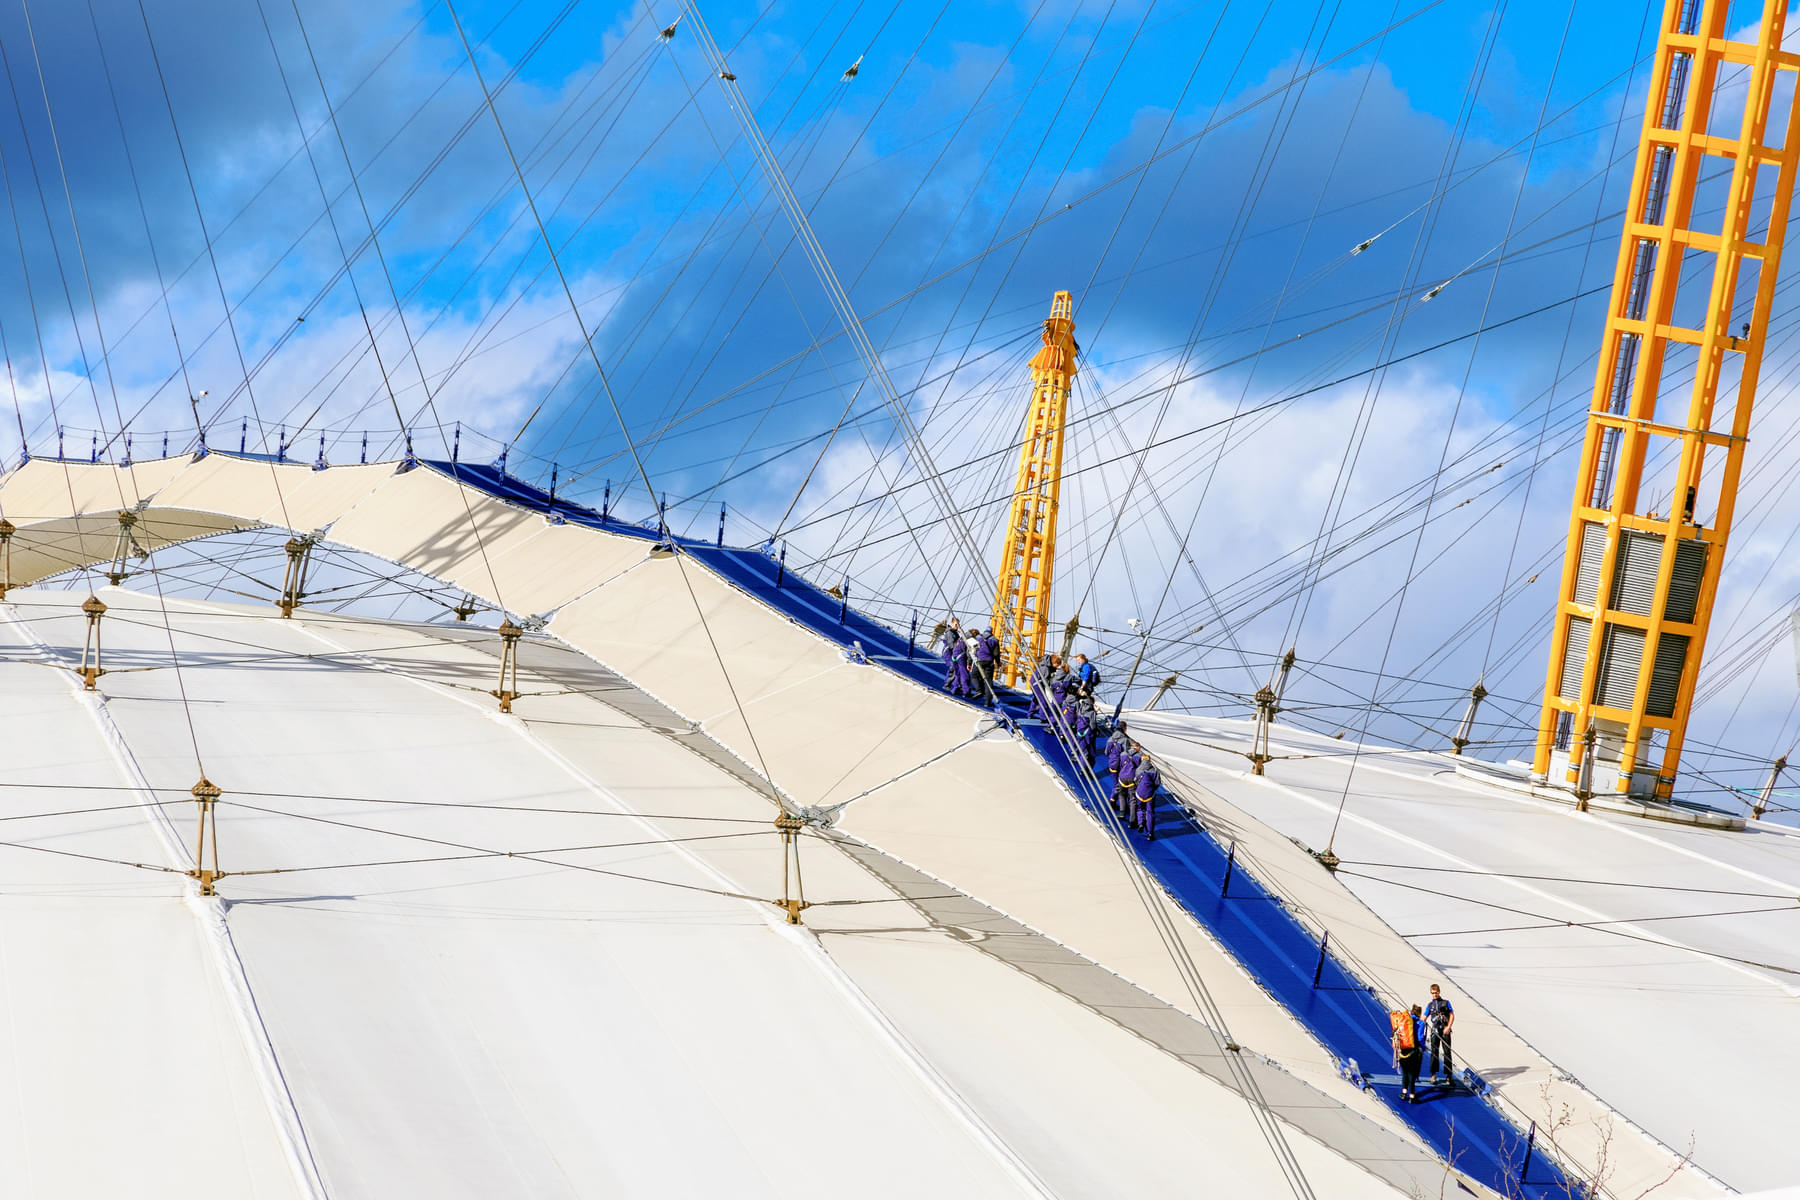 Feel the thrill of climbing up at the roof of O2